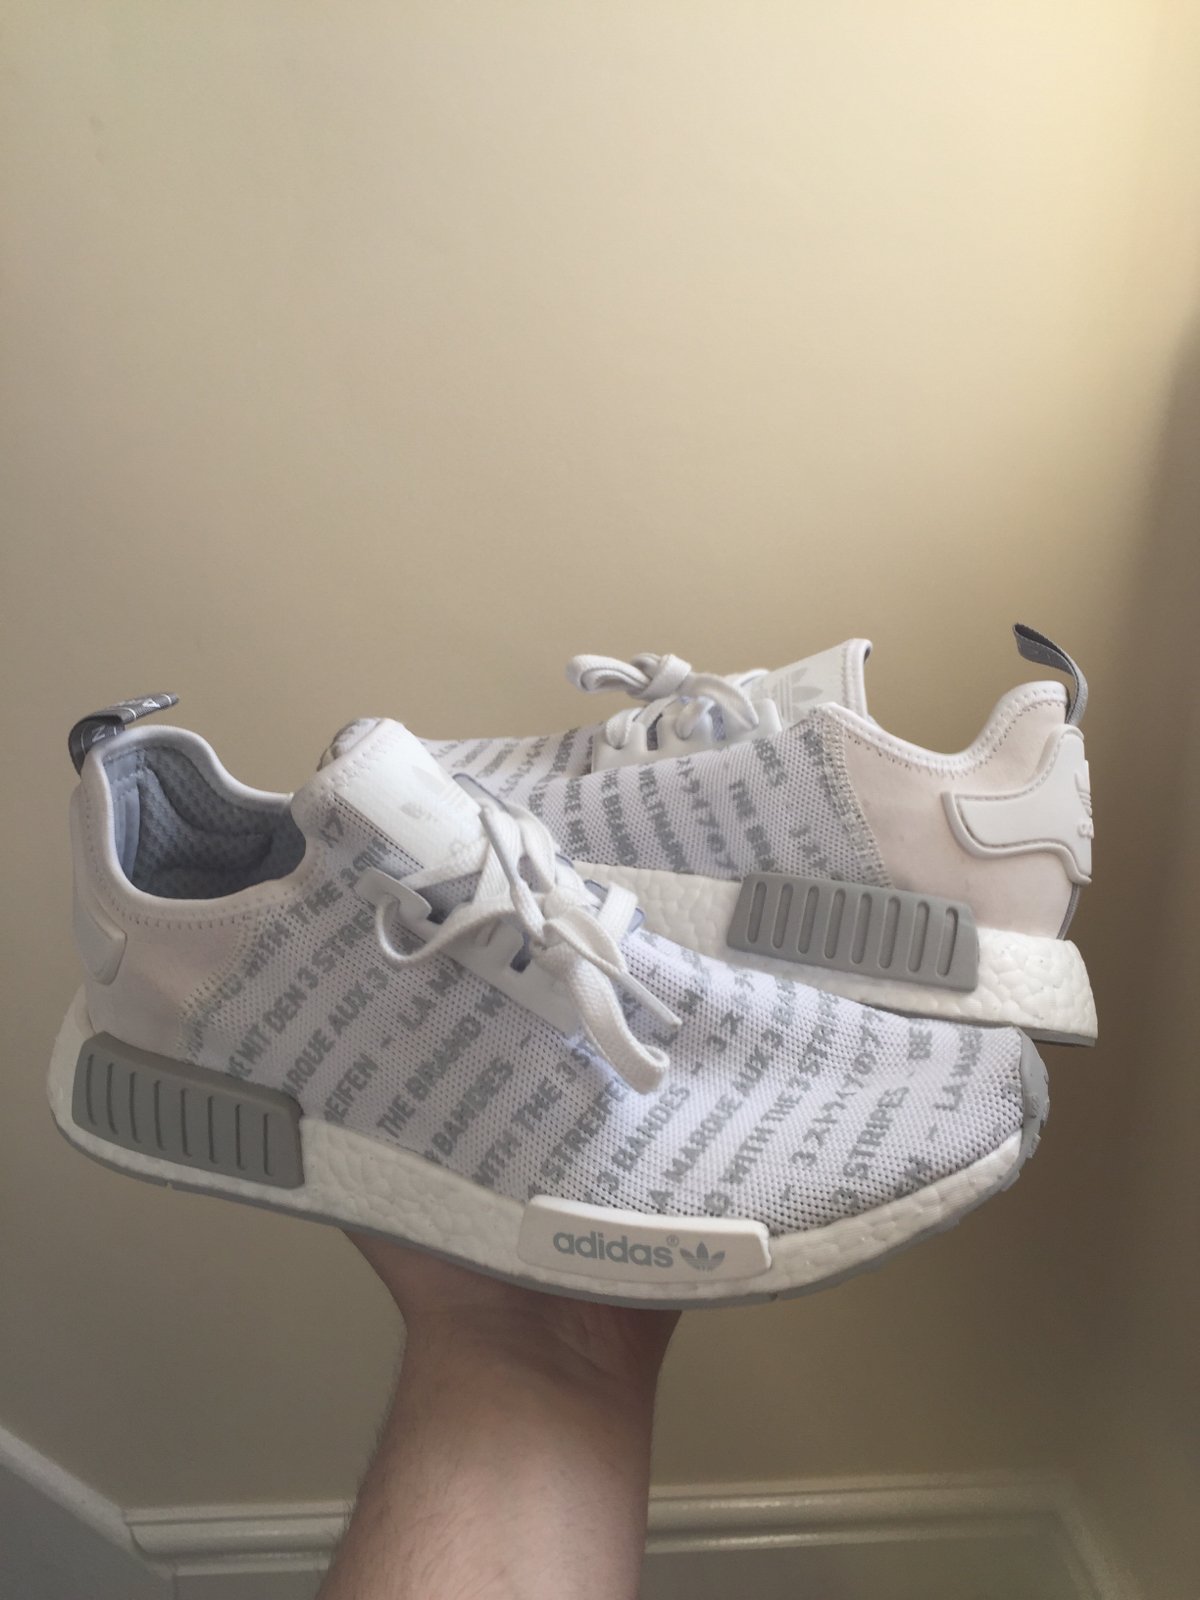 nmd whiteout